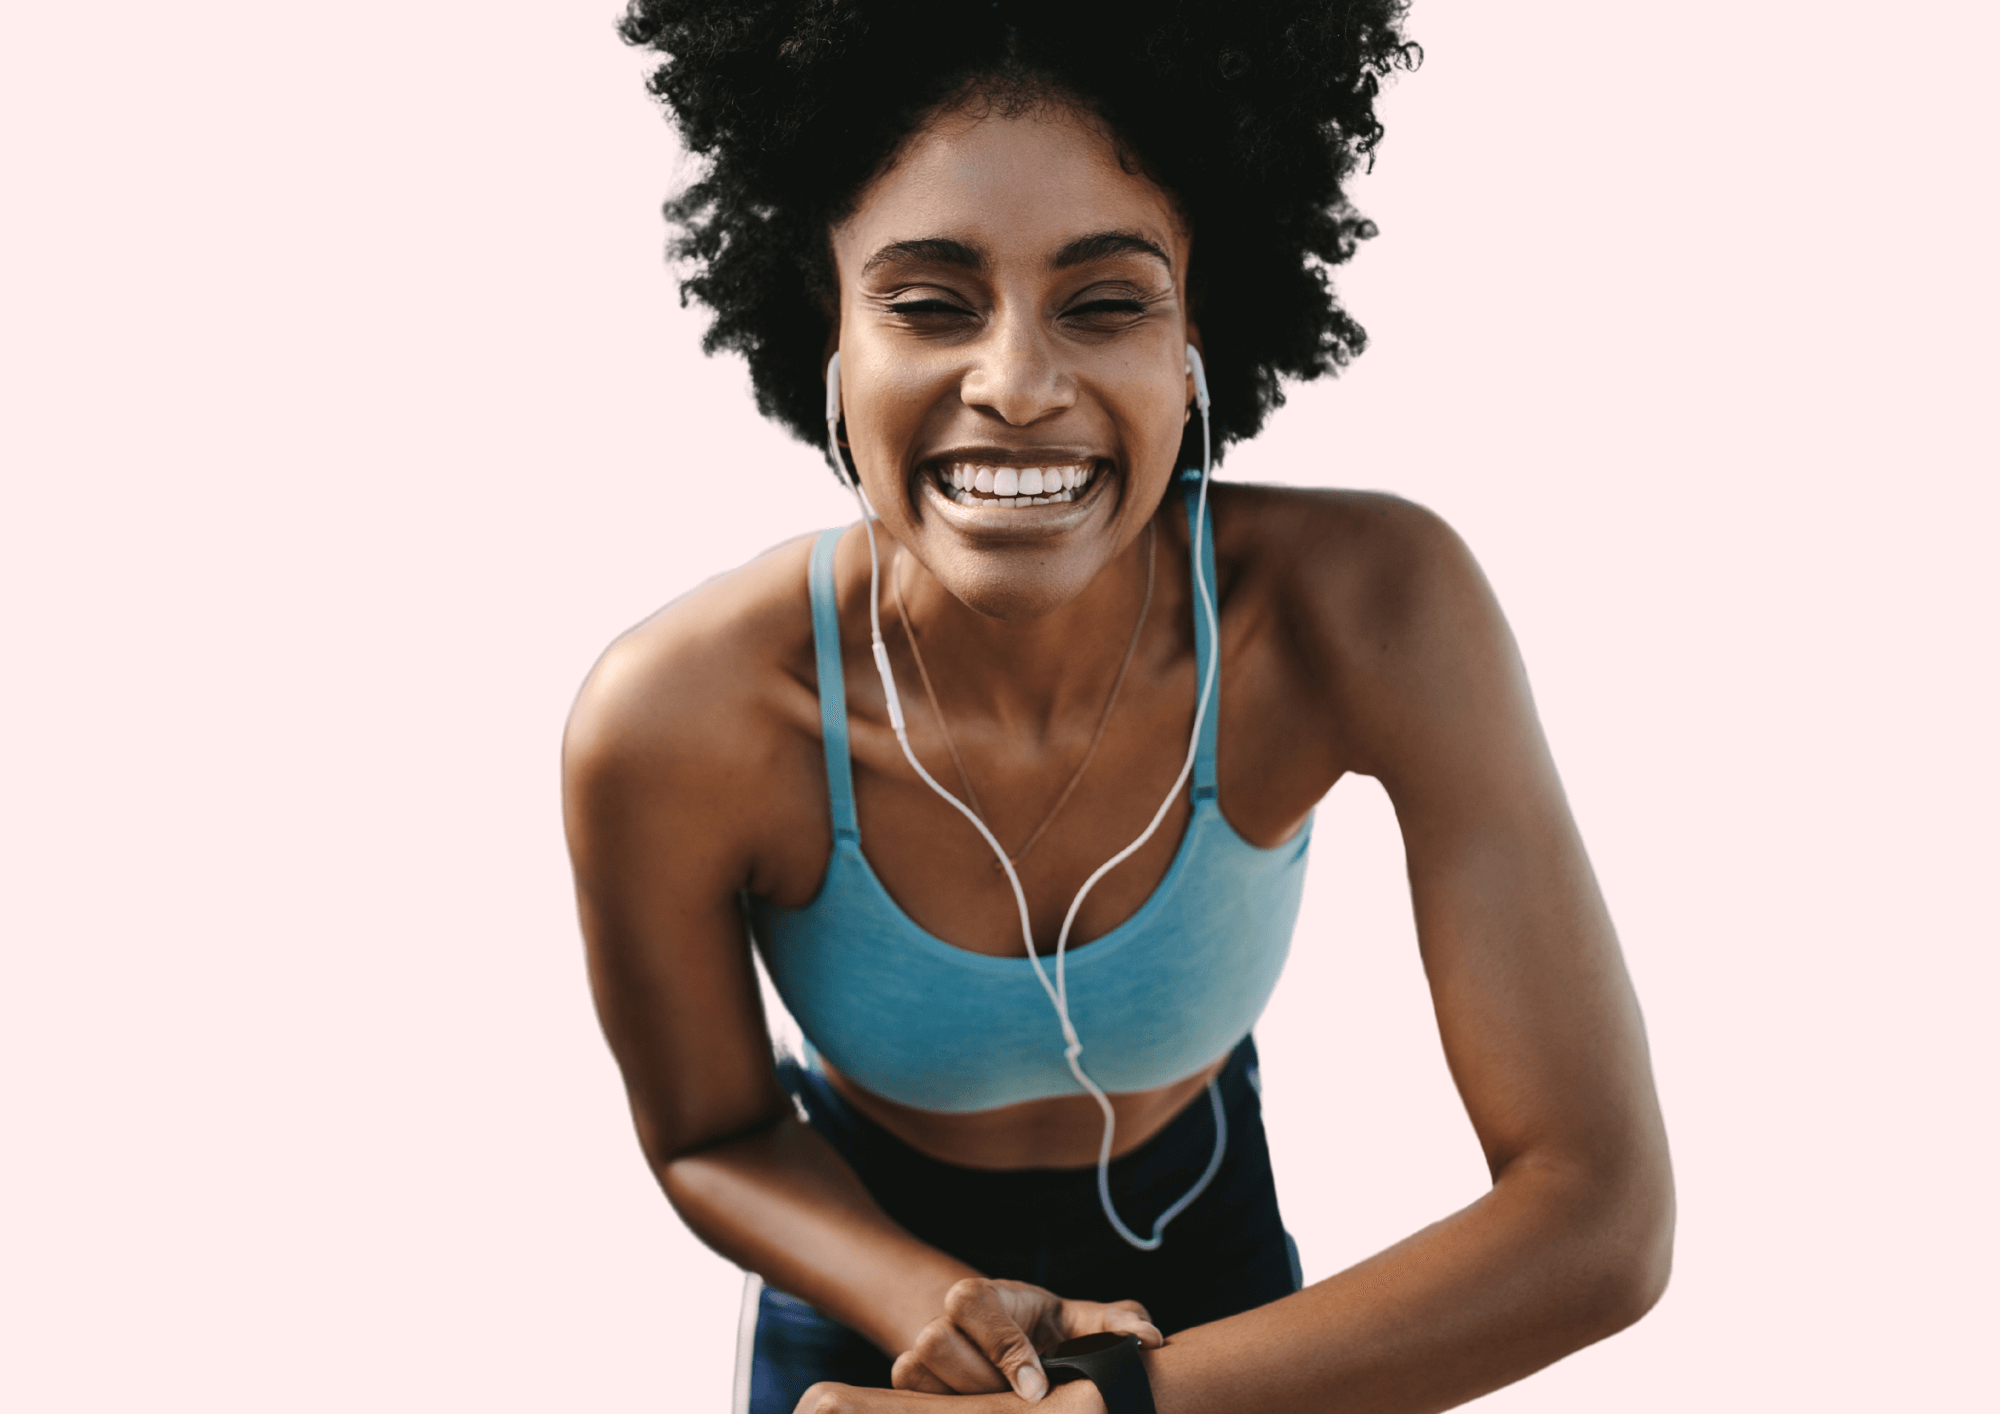 Sporty woman smiles while listening music during workout.